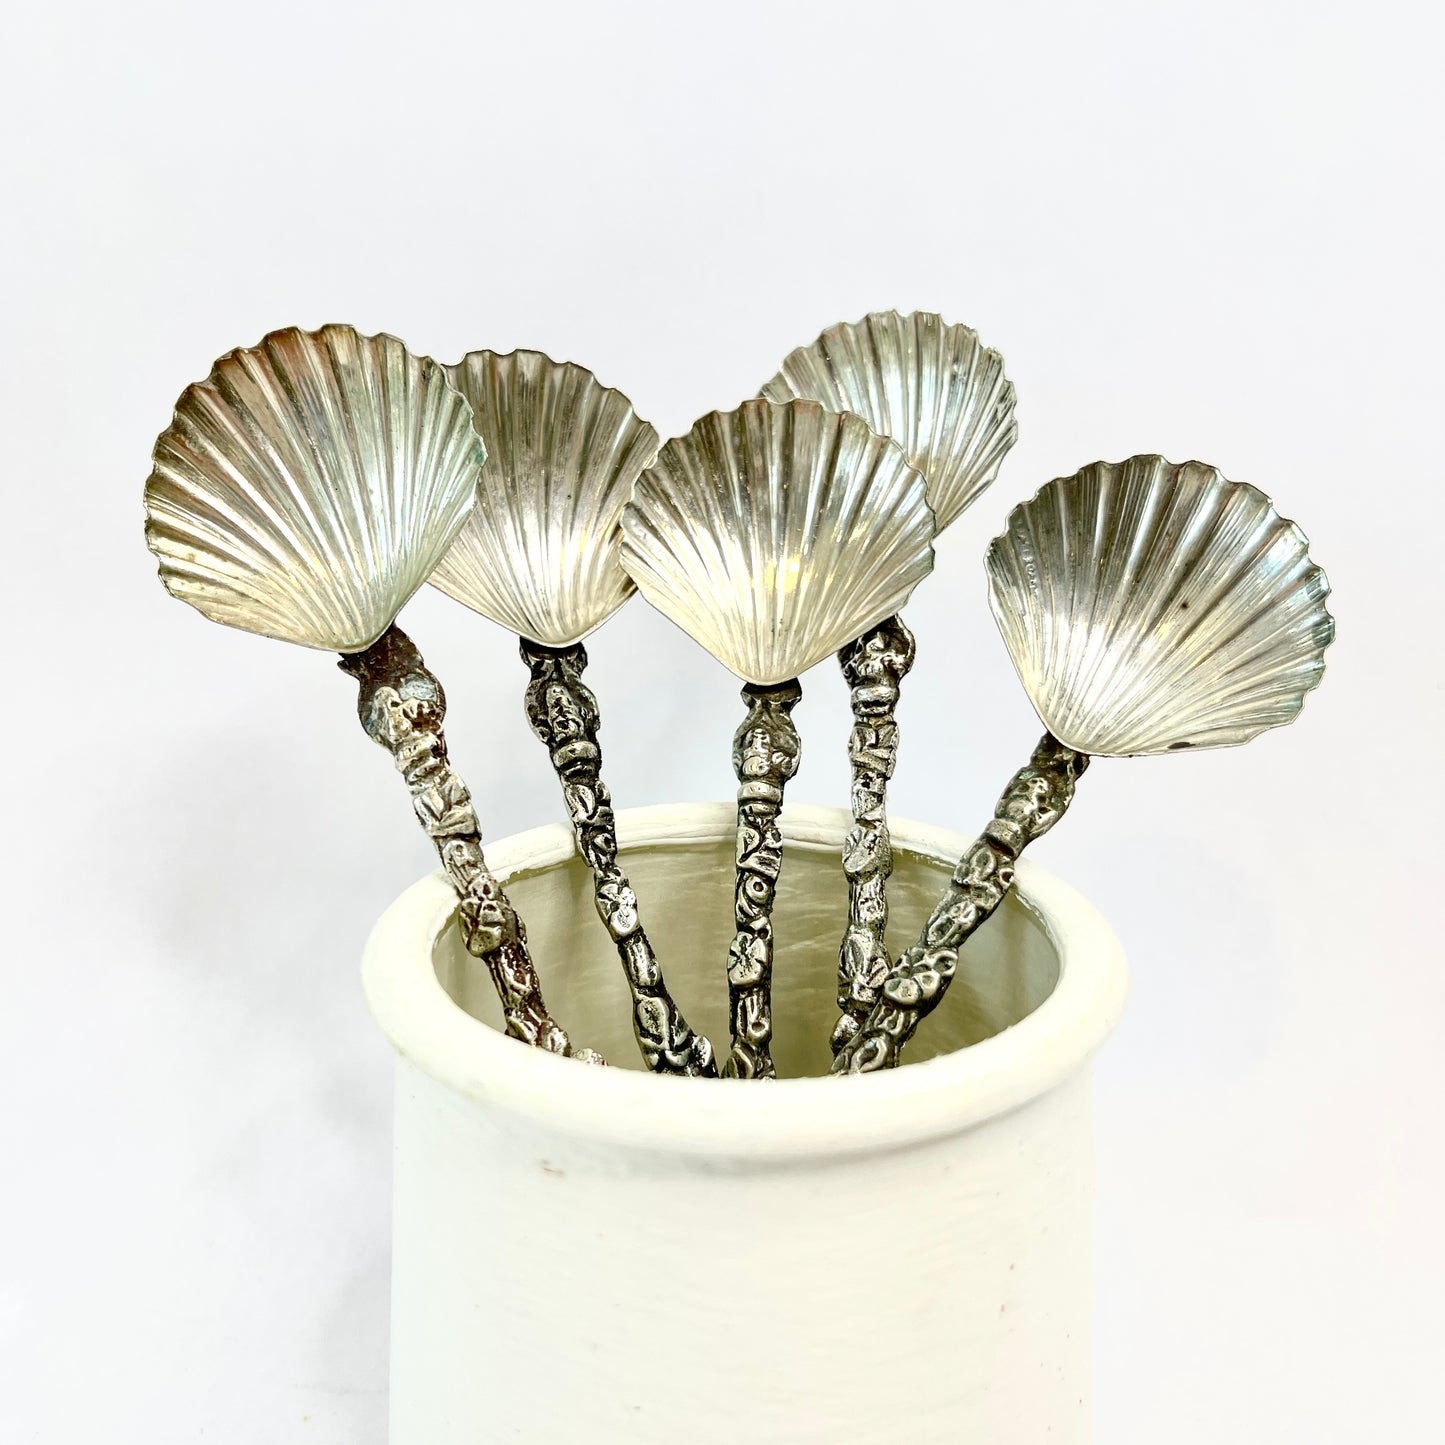 Vintage Silver Shell Spoons - Made in Italy - Price is for One Spoon